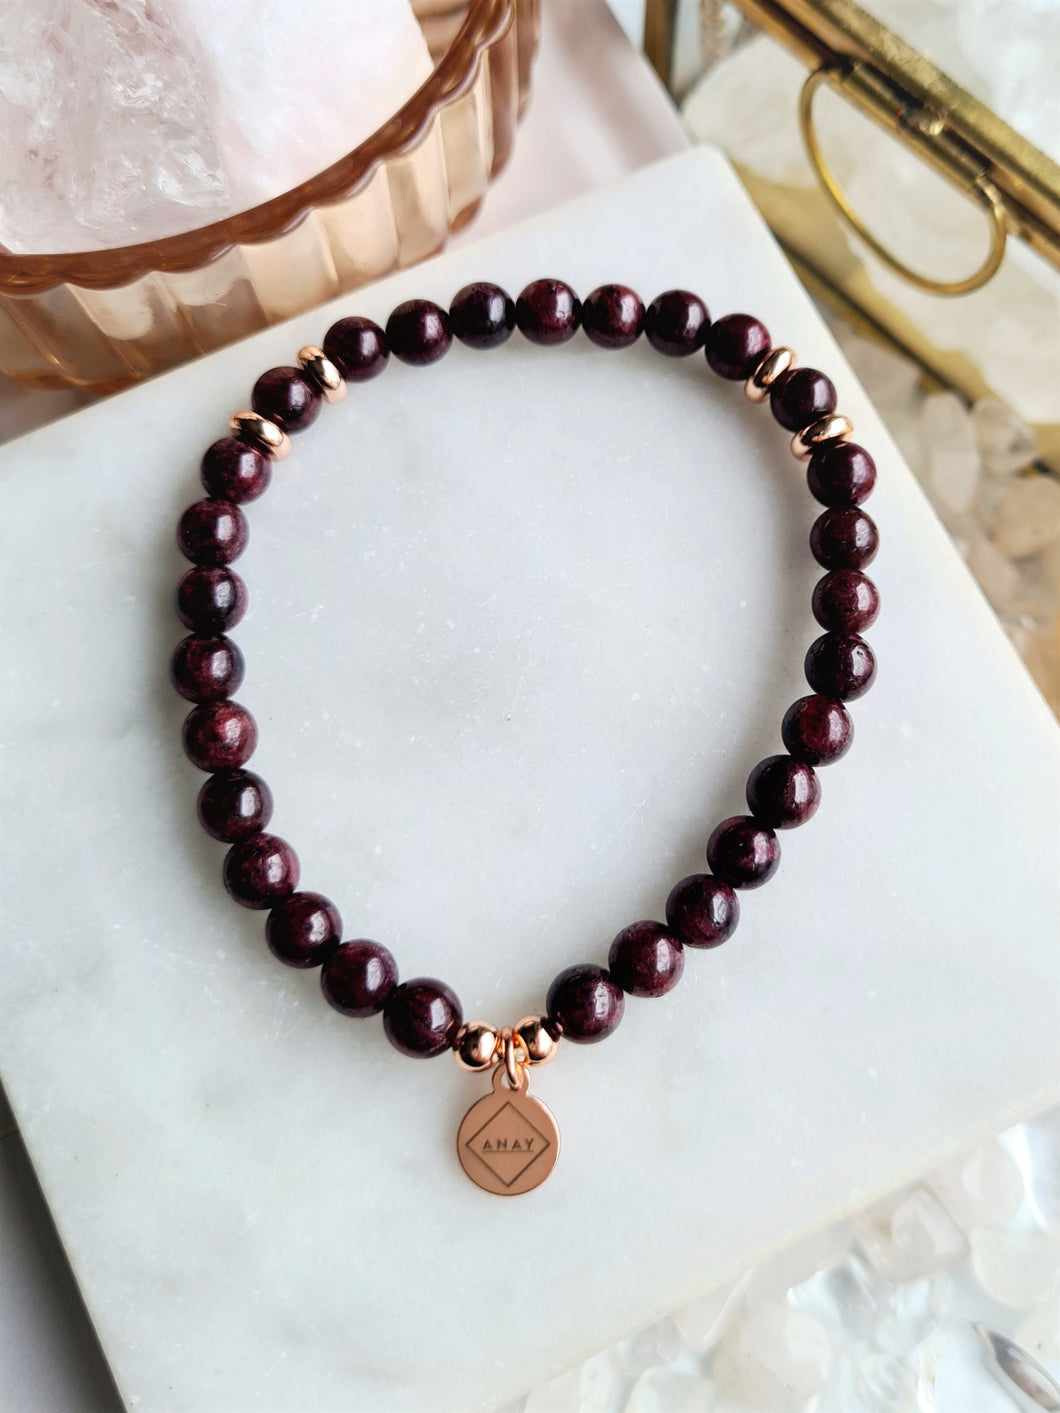 Garnet awakens creative talents and guides you to new passions. Its fiery energy keeps you motivated and moving forward to build the life you always wanted. 